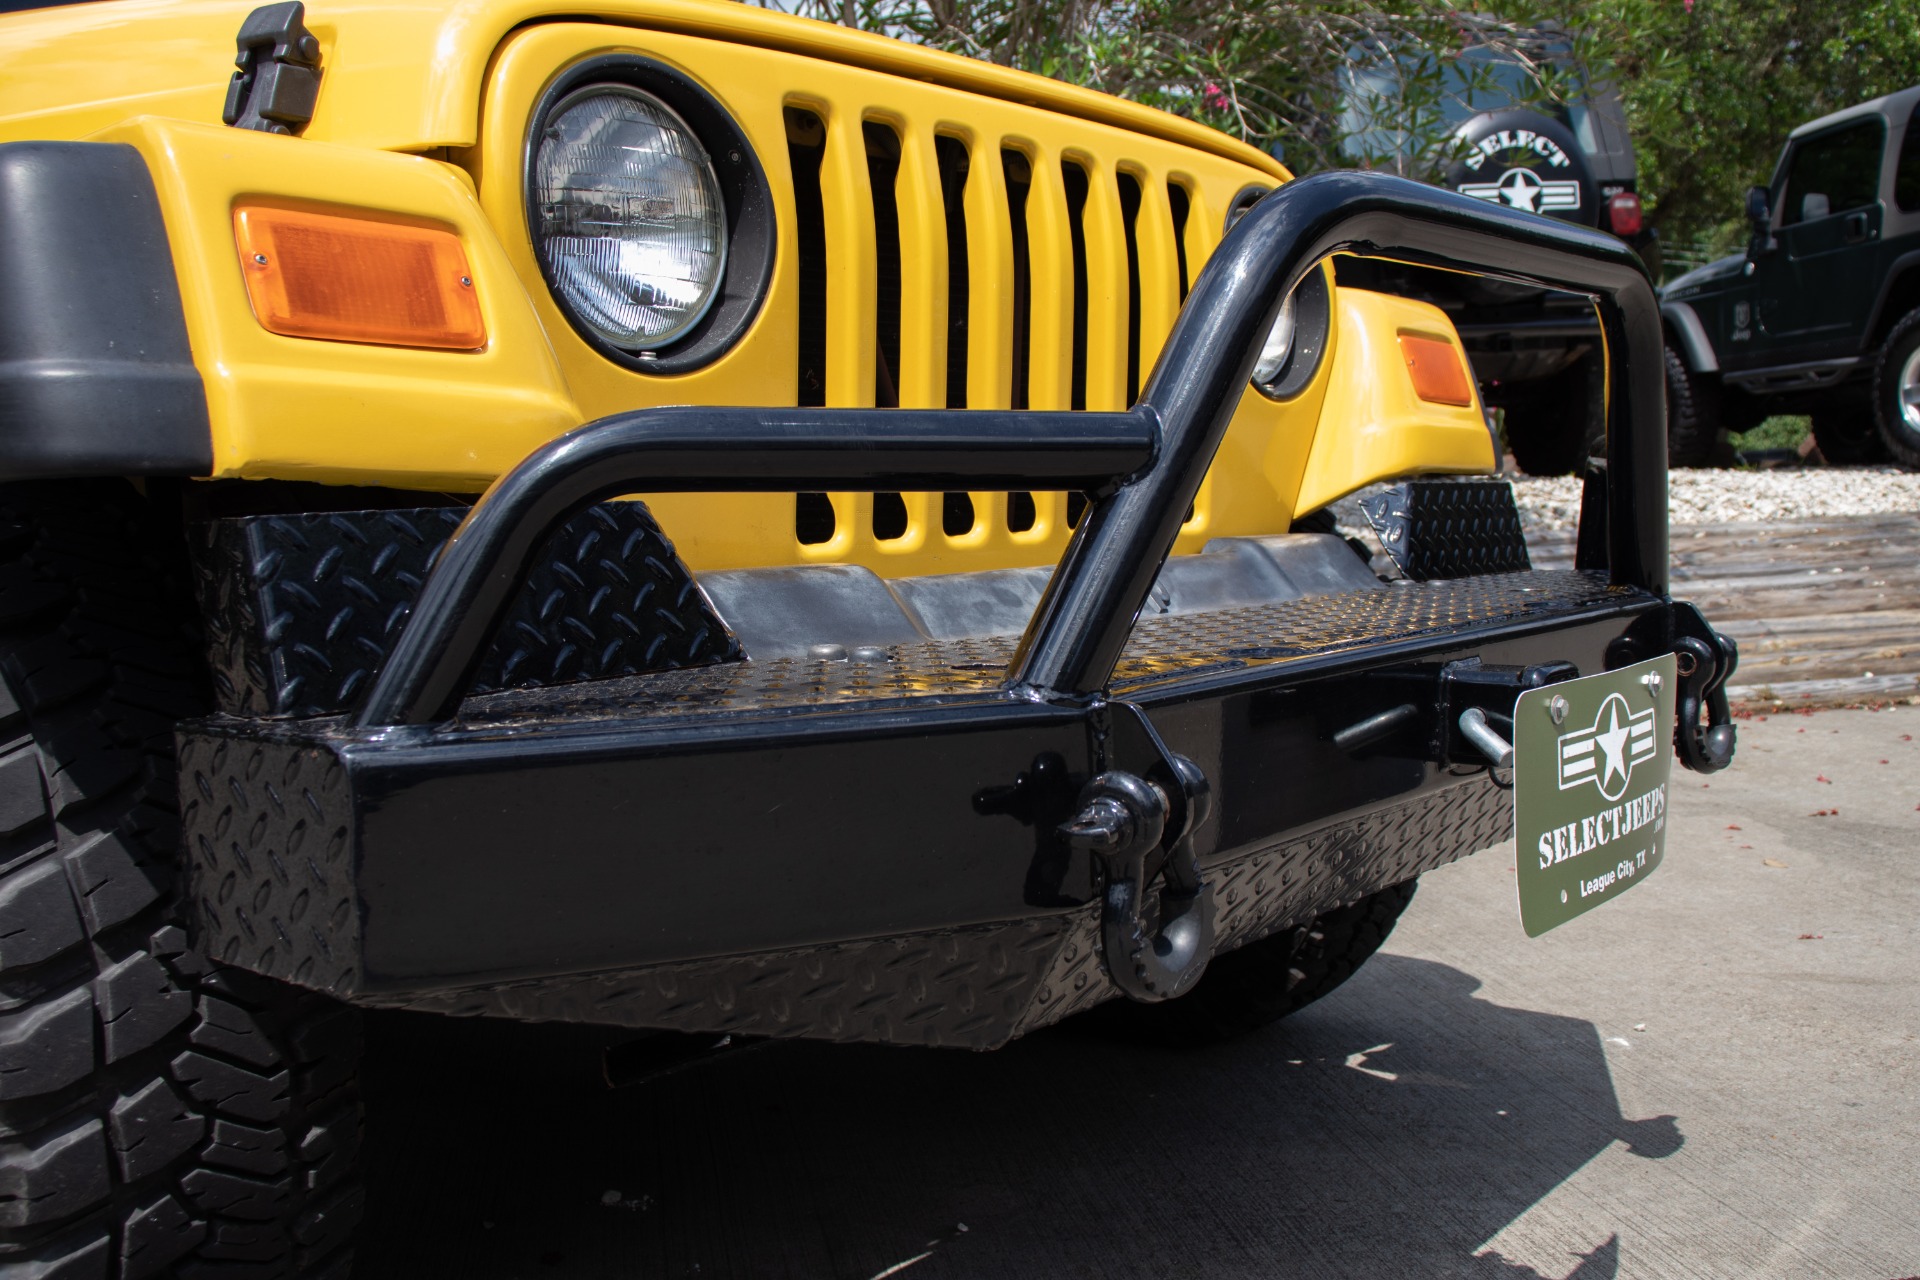 Used 2002 Jeep Wrangler X For Sale ($14,995) | Select Jeeps Inc. Stock  #711614